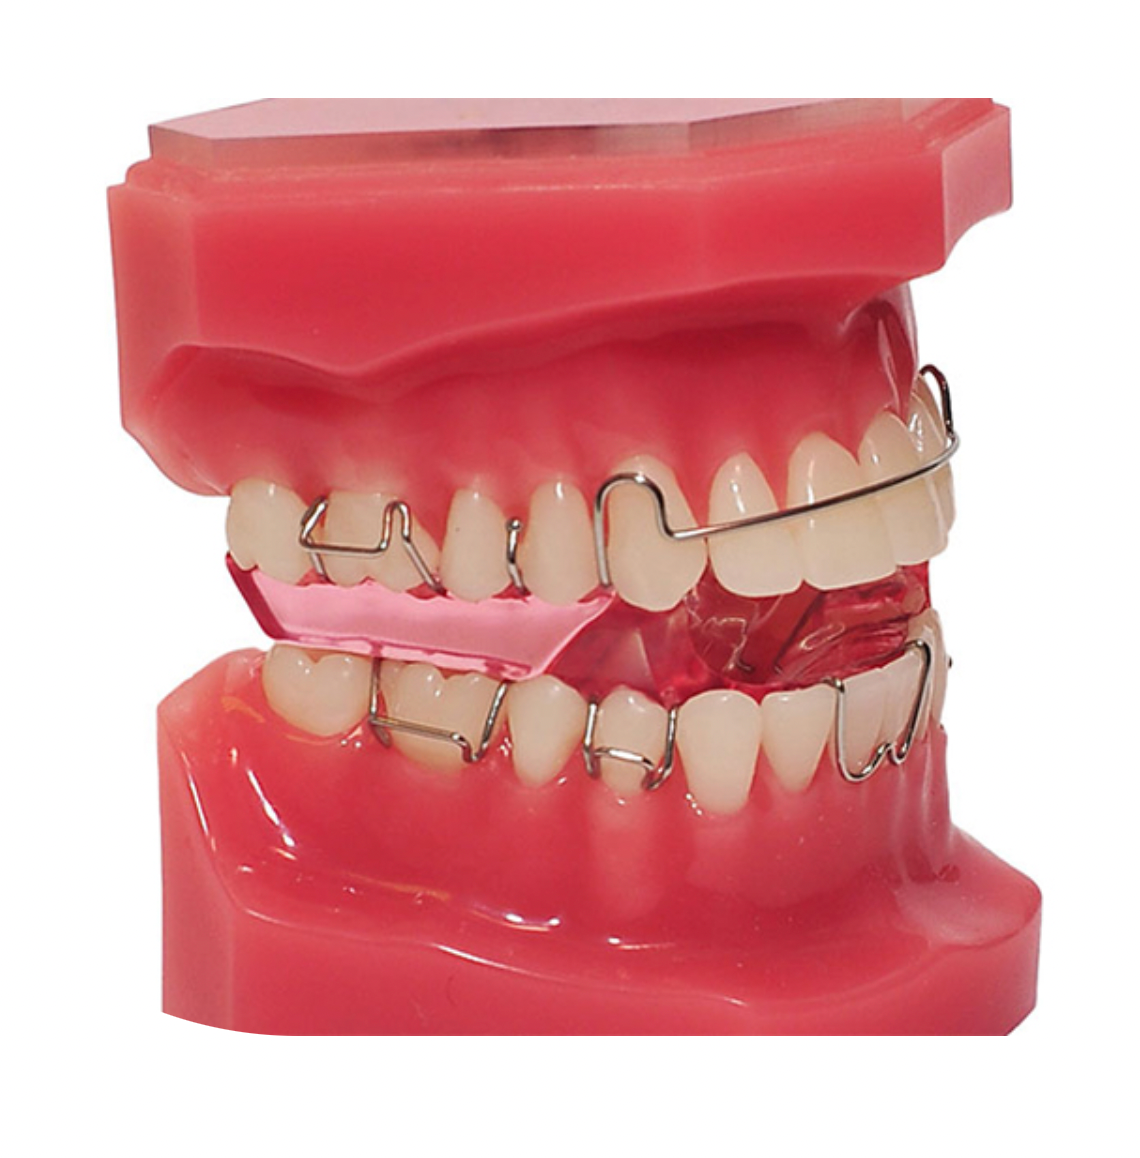 Moonee Ponds Orthodontics  Are Clear or Metal Braces Better?